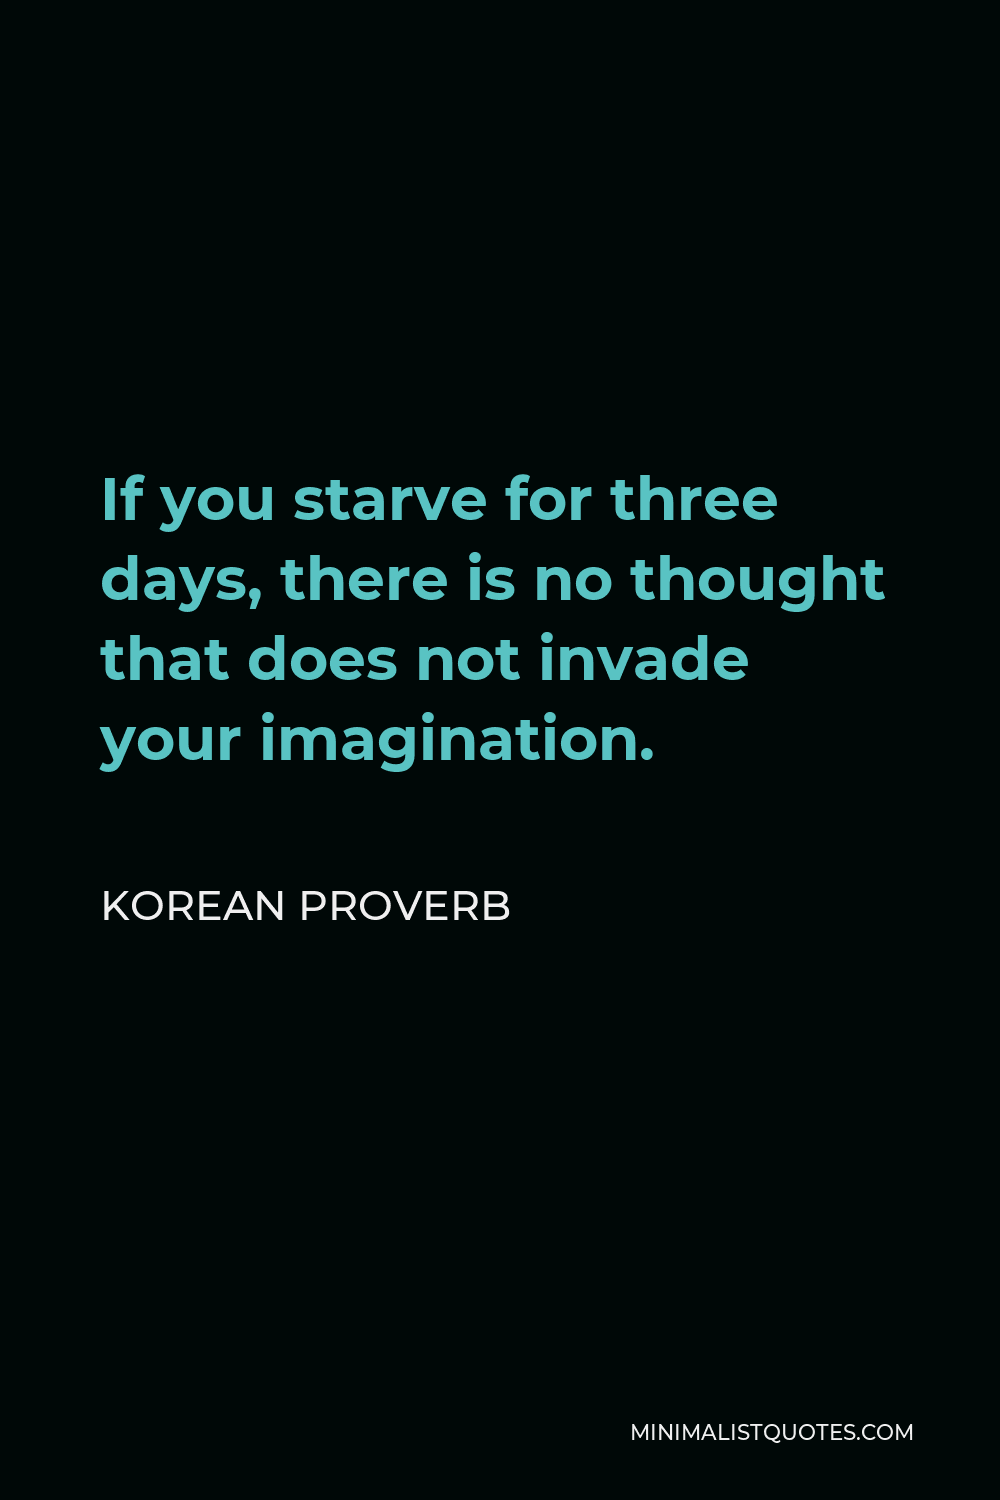 Korean Proverb Quote - If you starve for three days, there is no thought that does not invade your imagination.